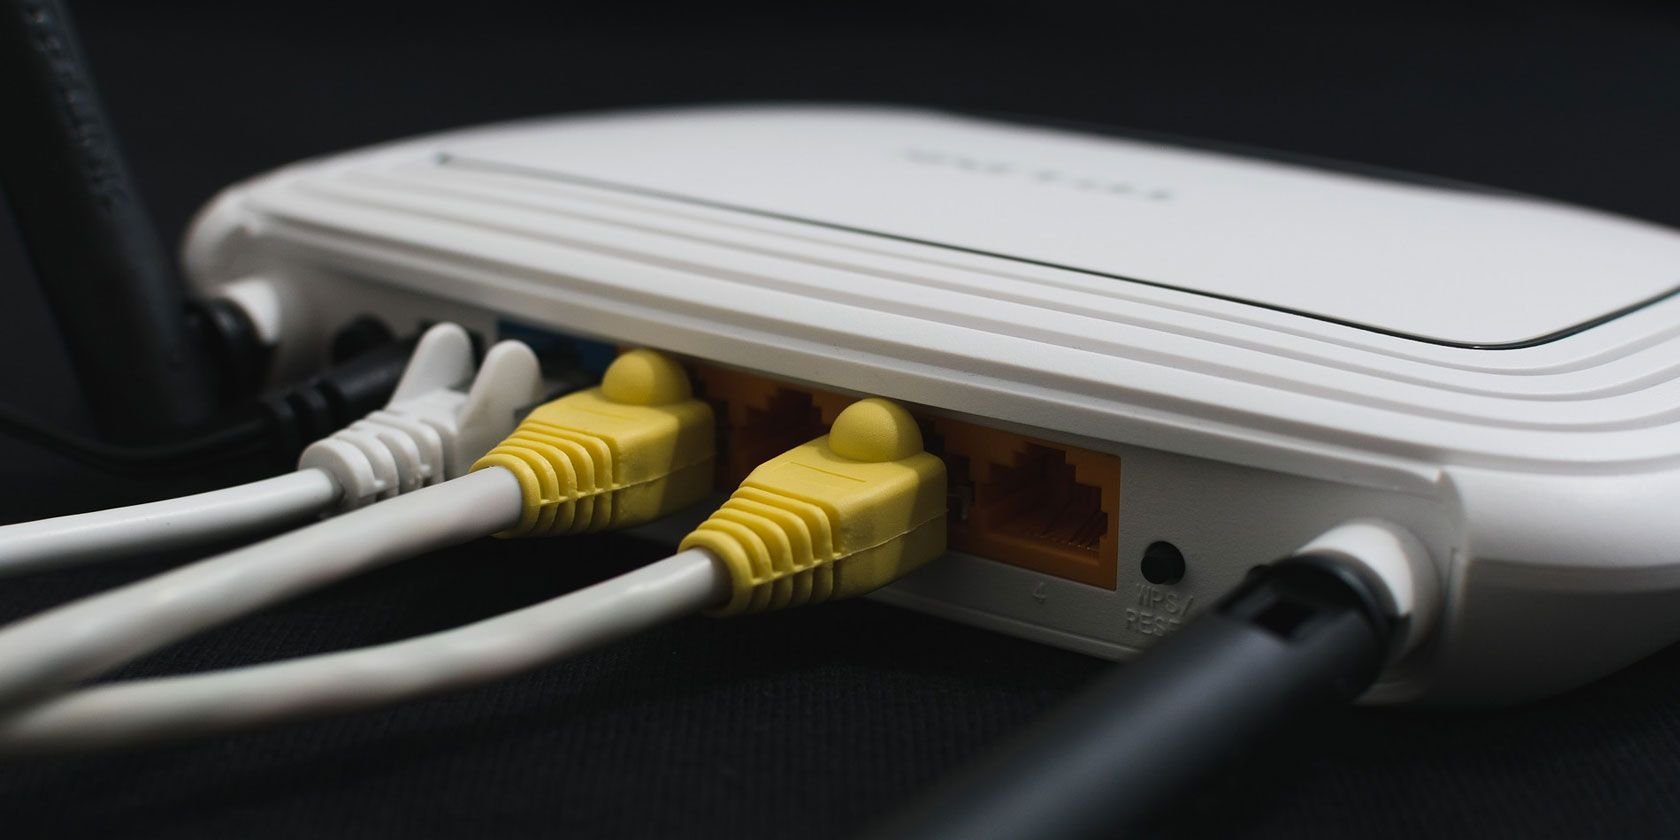 14 Useful Ways to Reuse an Old Router (Don't Throw It Away!)